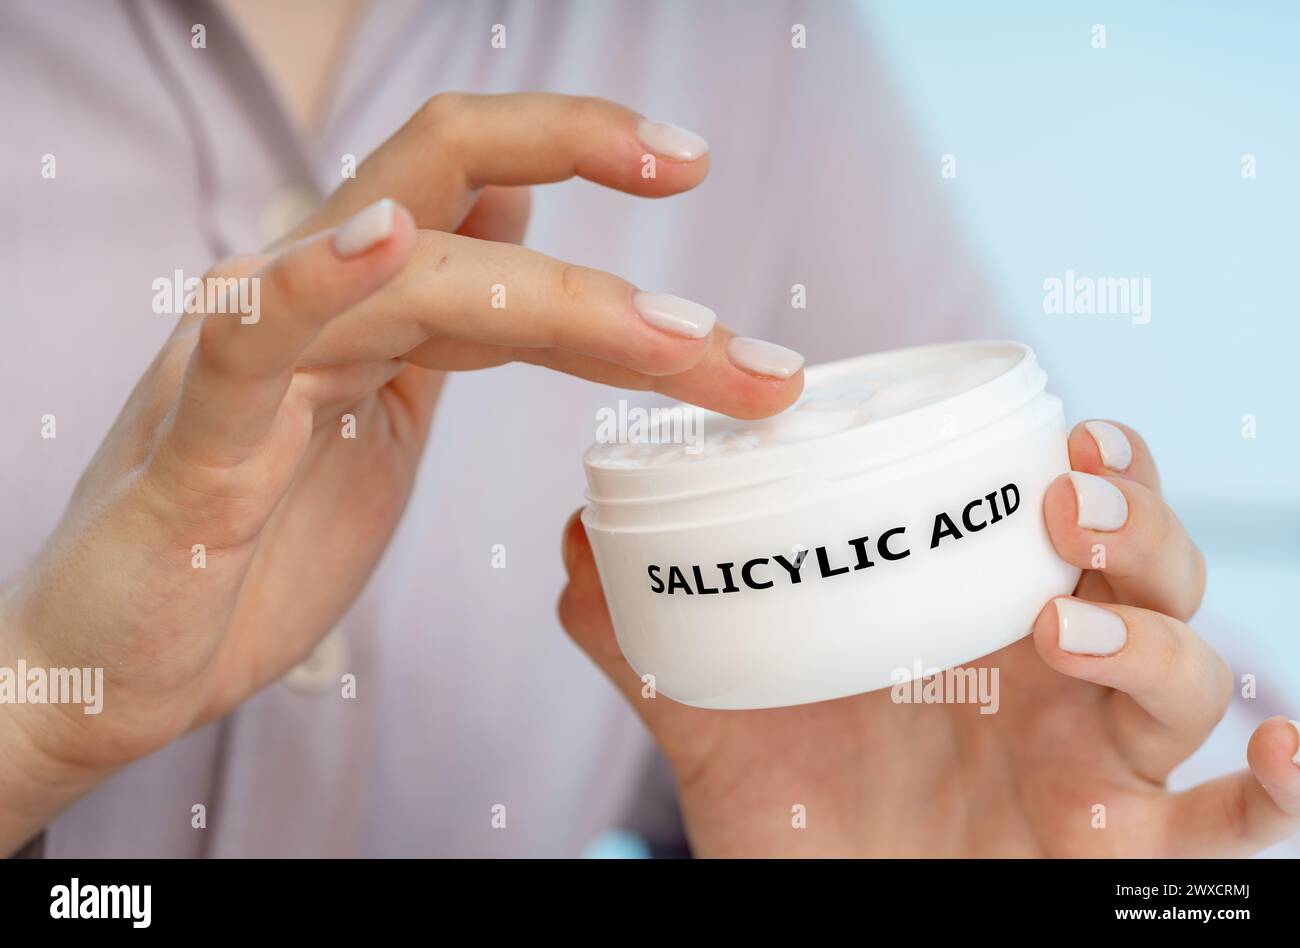 Salicylic acid medical cream, conceptual image. A keratolytic cream that helps exfoliate the skin and is commonly used to treat acne, psoriasis, and warts. Stock Photo